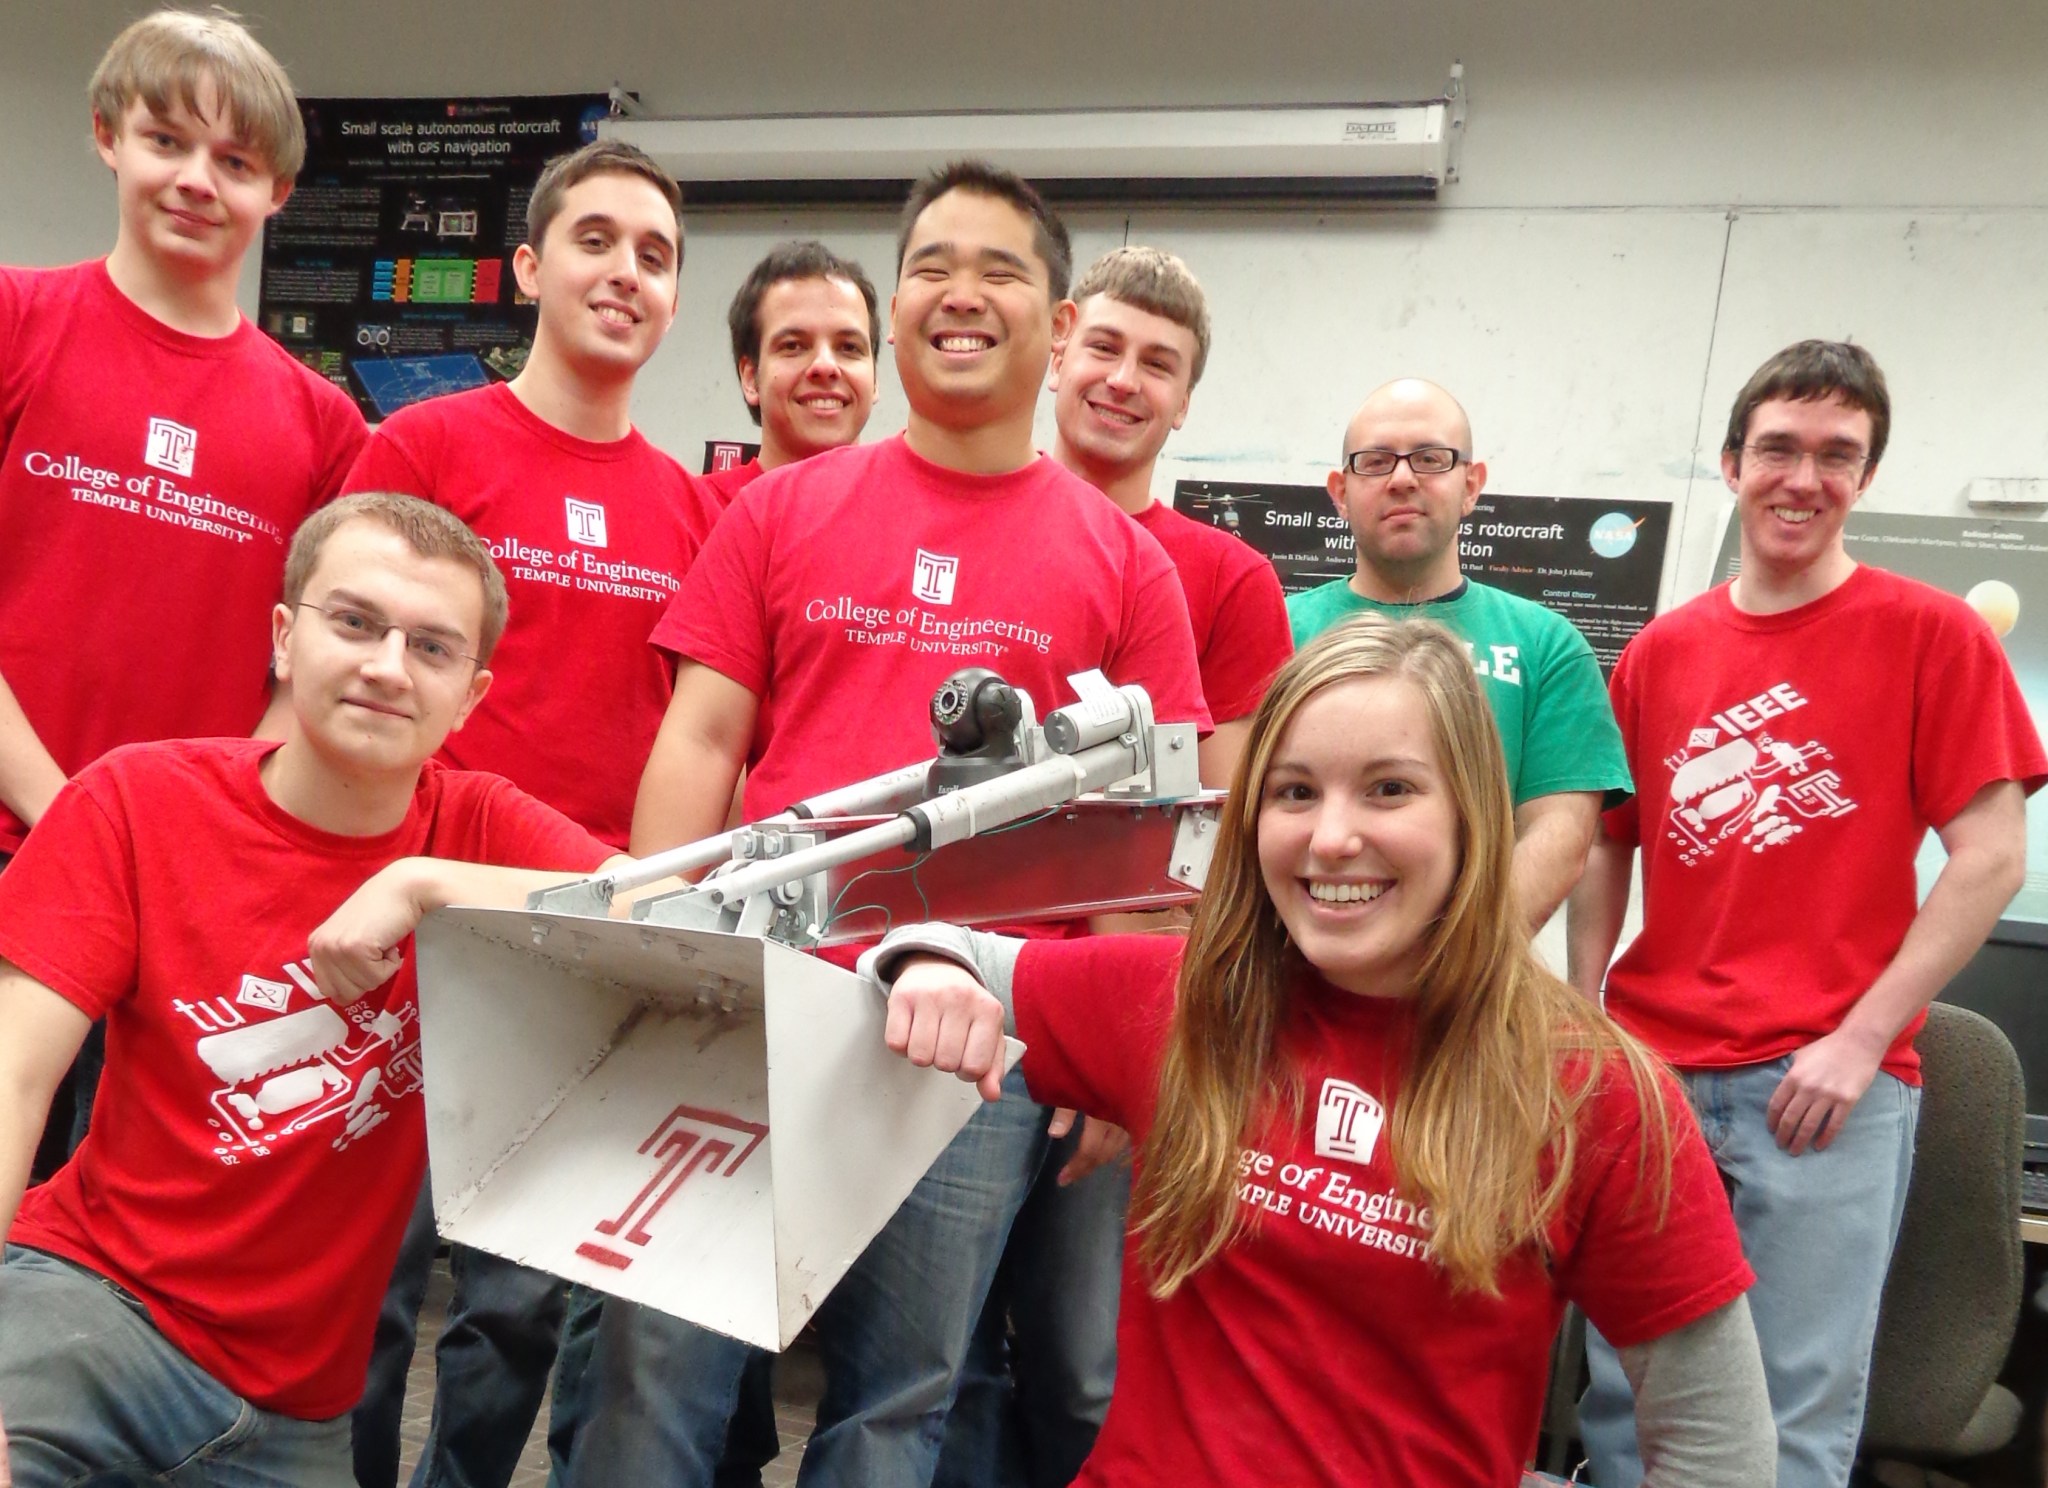 LUNABOTICS team poses with its entry.